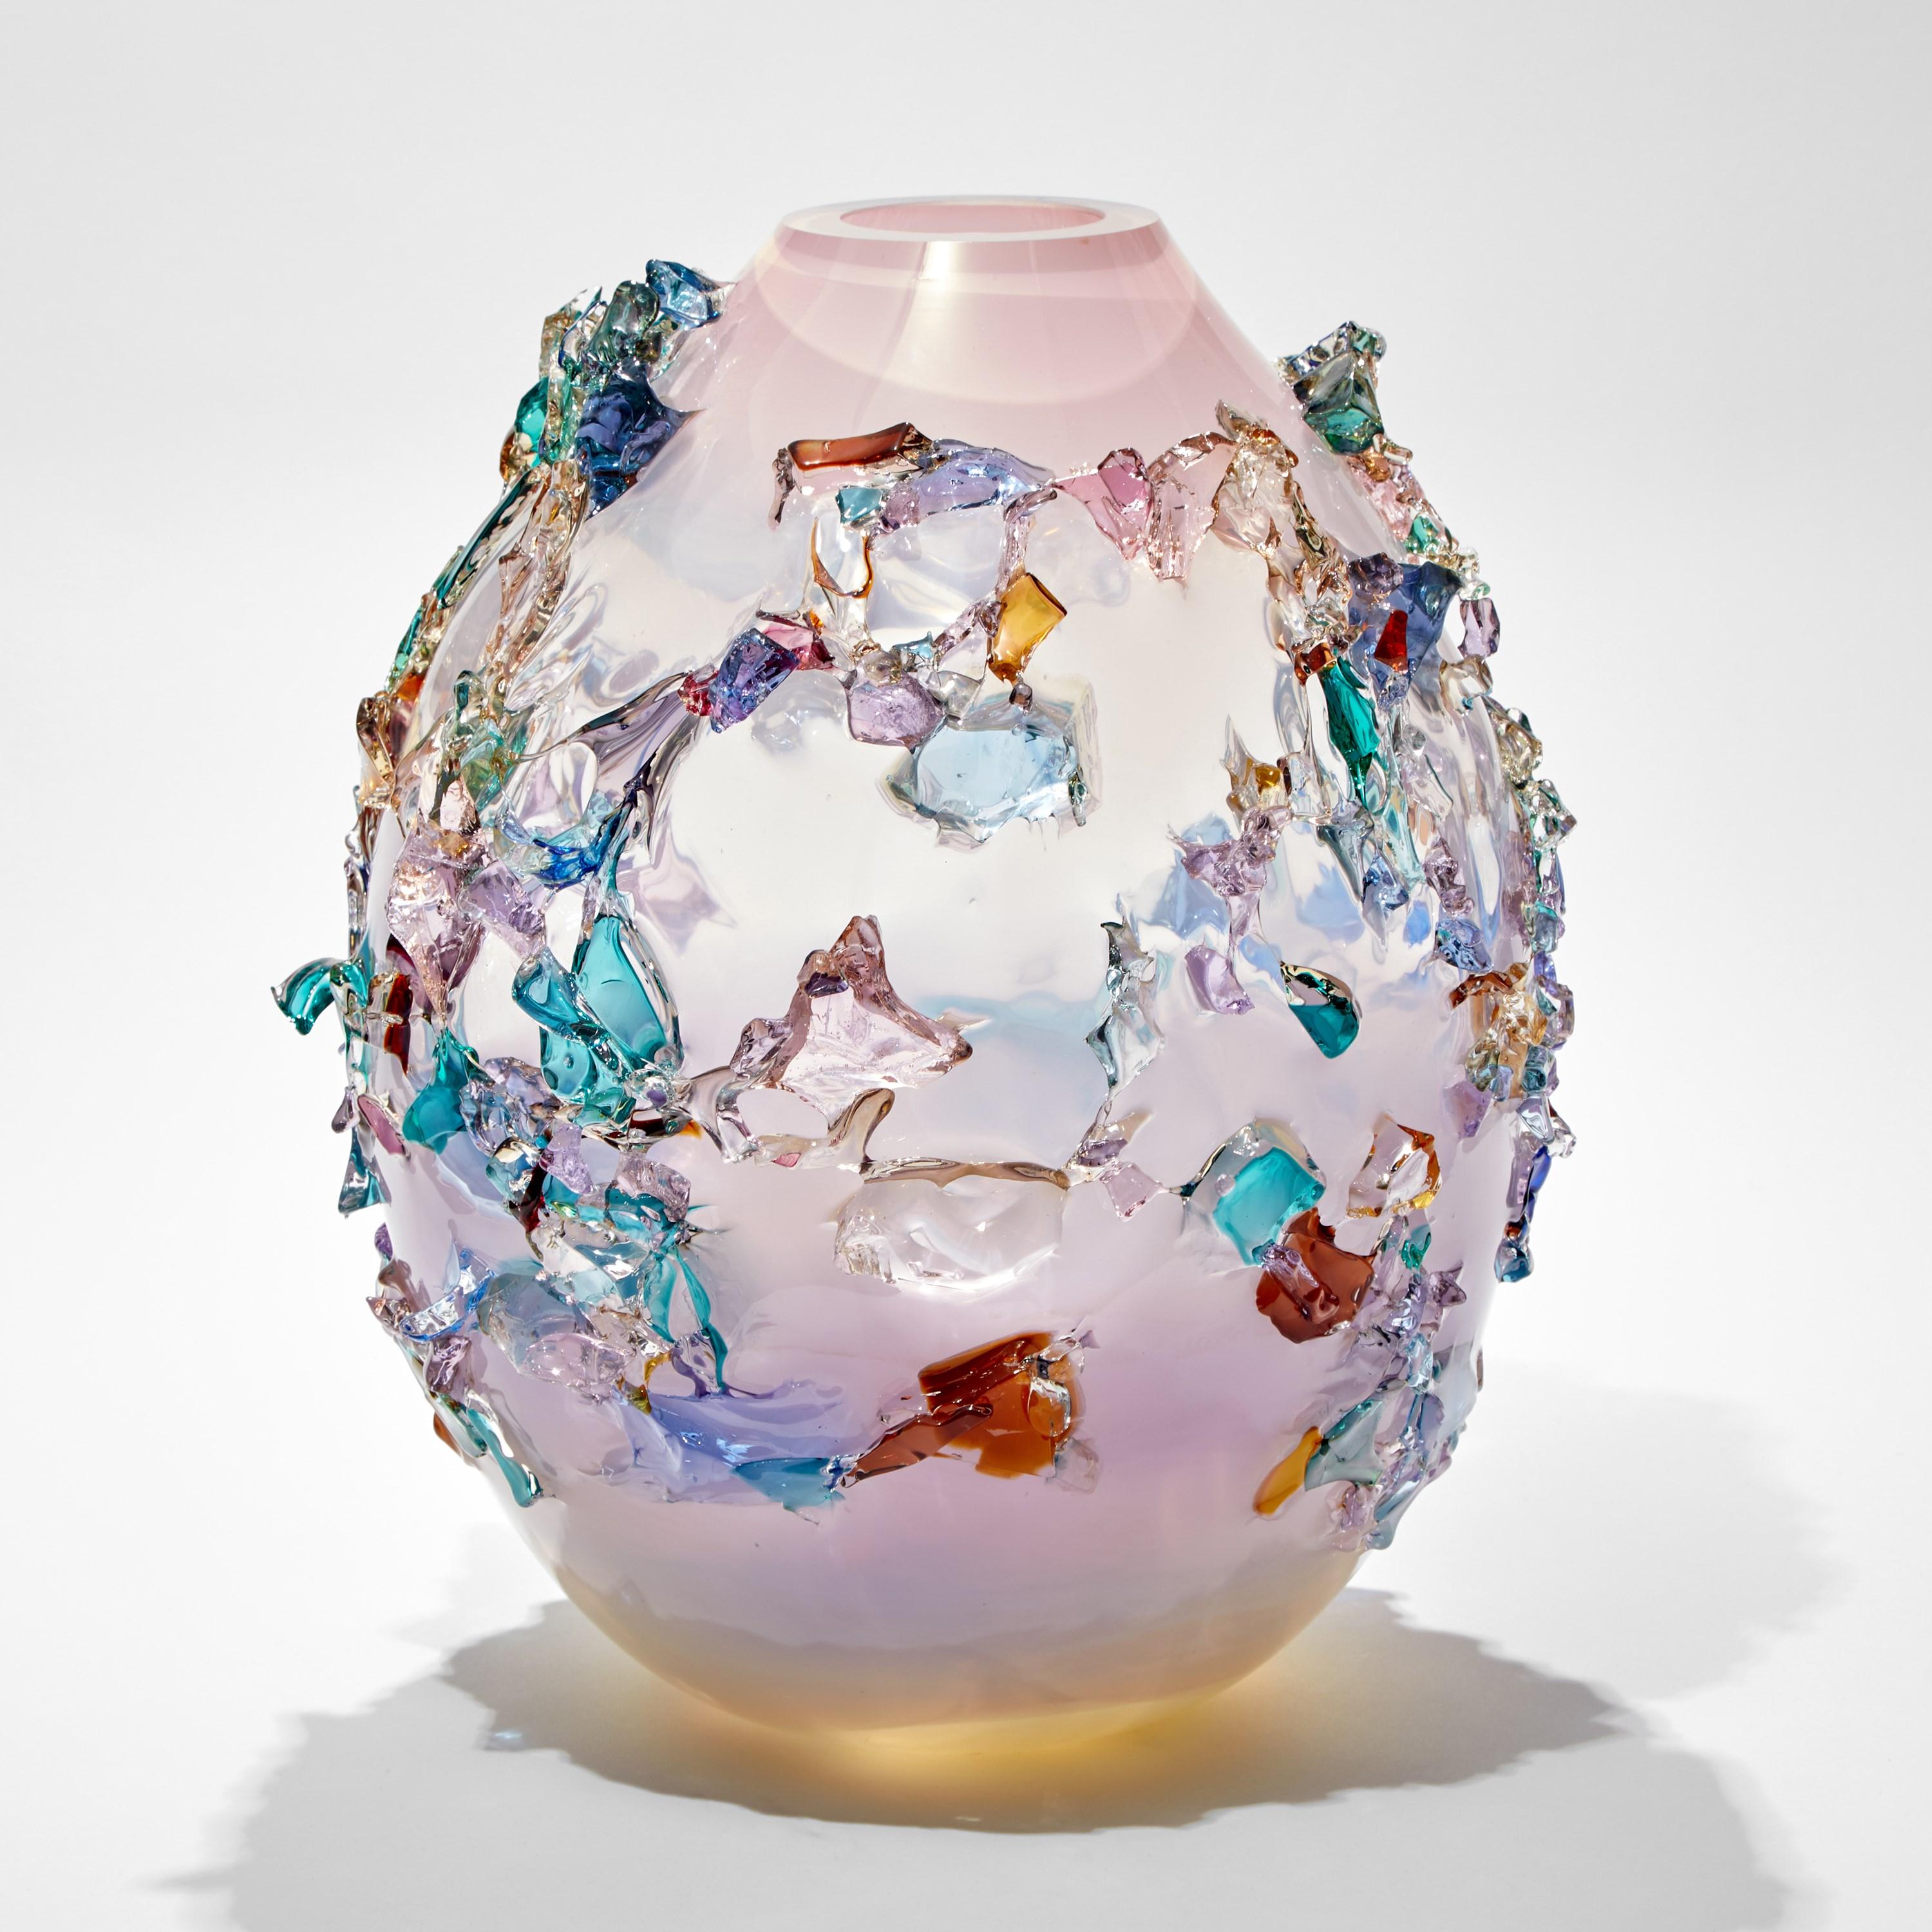 Sakura TRP21010 is a unique pink and multicolored hand-blown art glass sculptural vase, covered in an organic glass shard adornment by the Dutch artist Maarten Vorlijk. The piece is flame polished to soften the edges of all the additional external